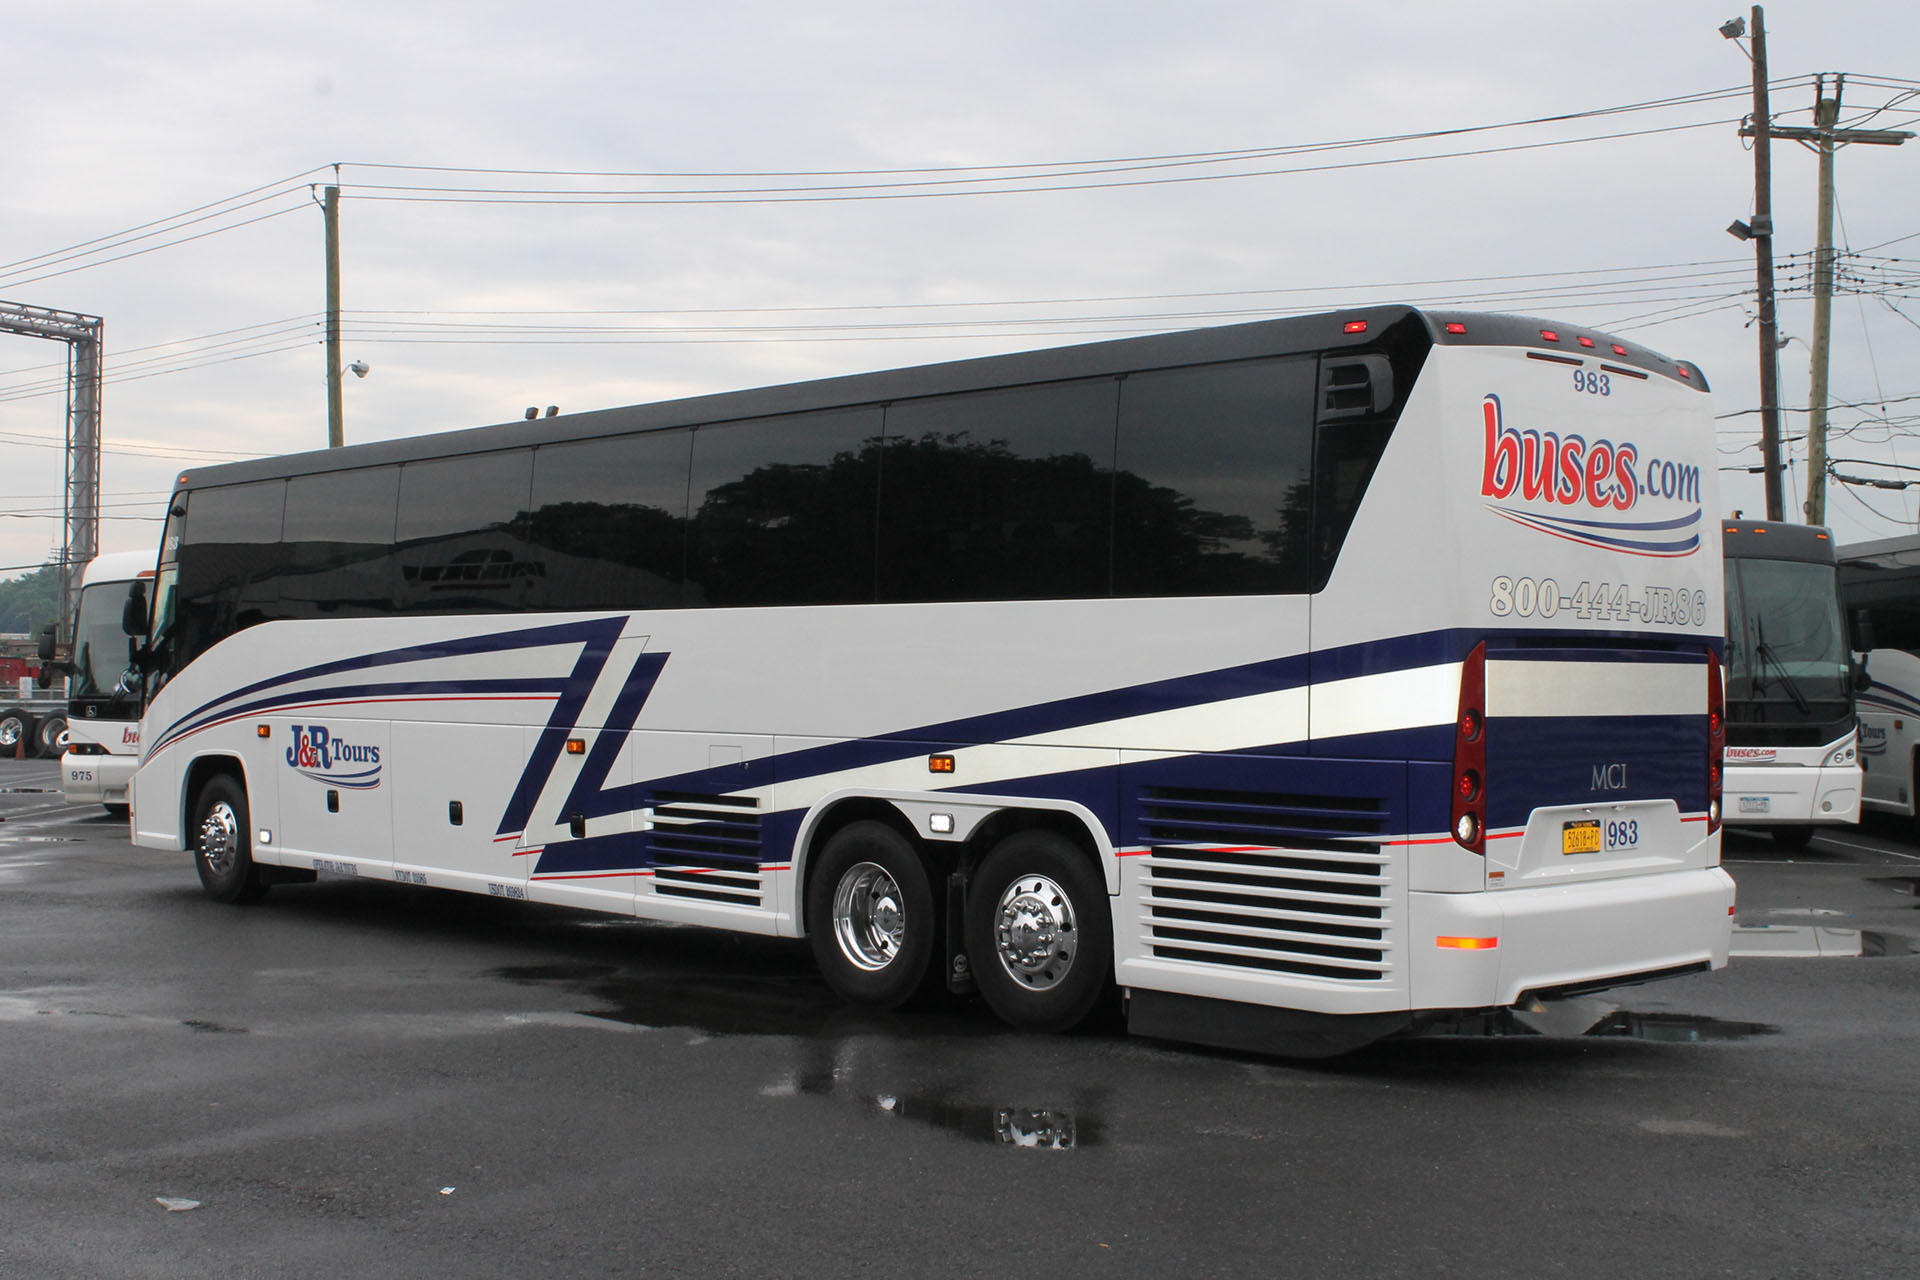 Back view of motorcoach